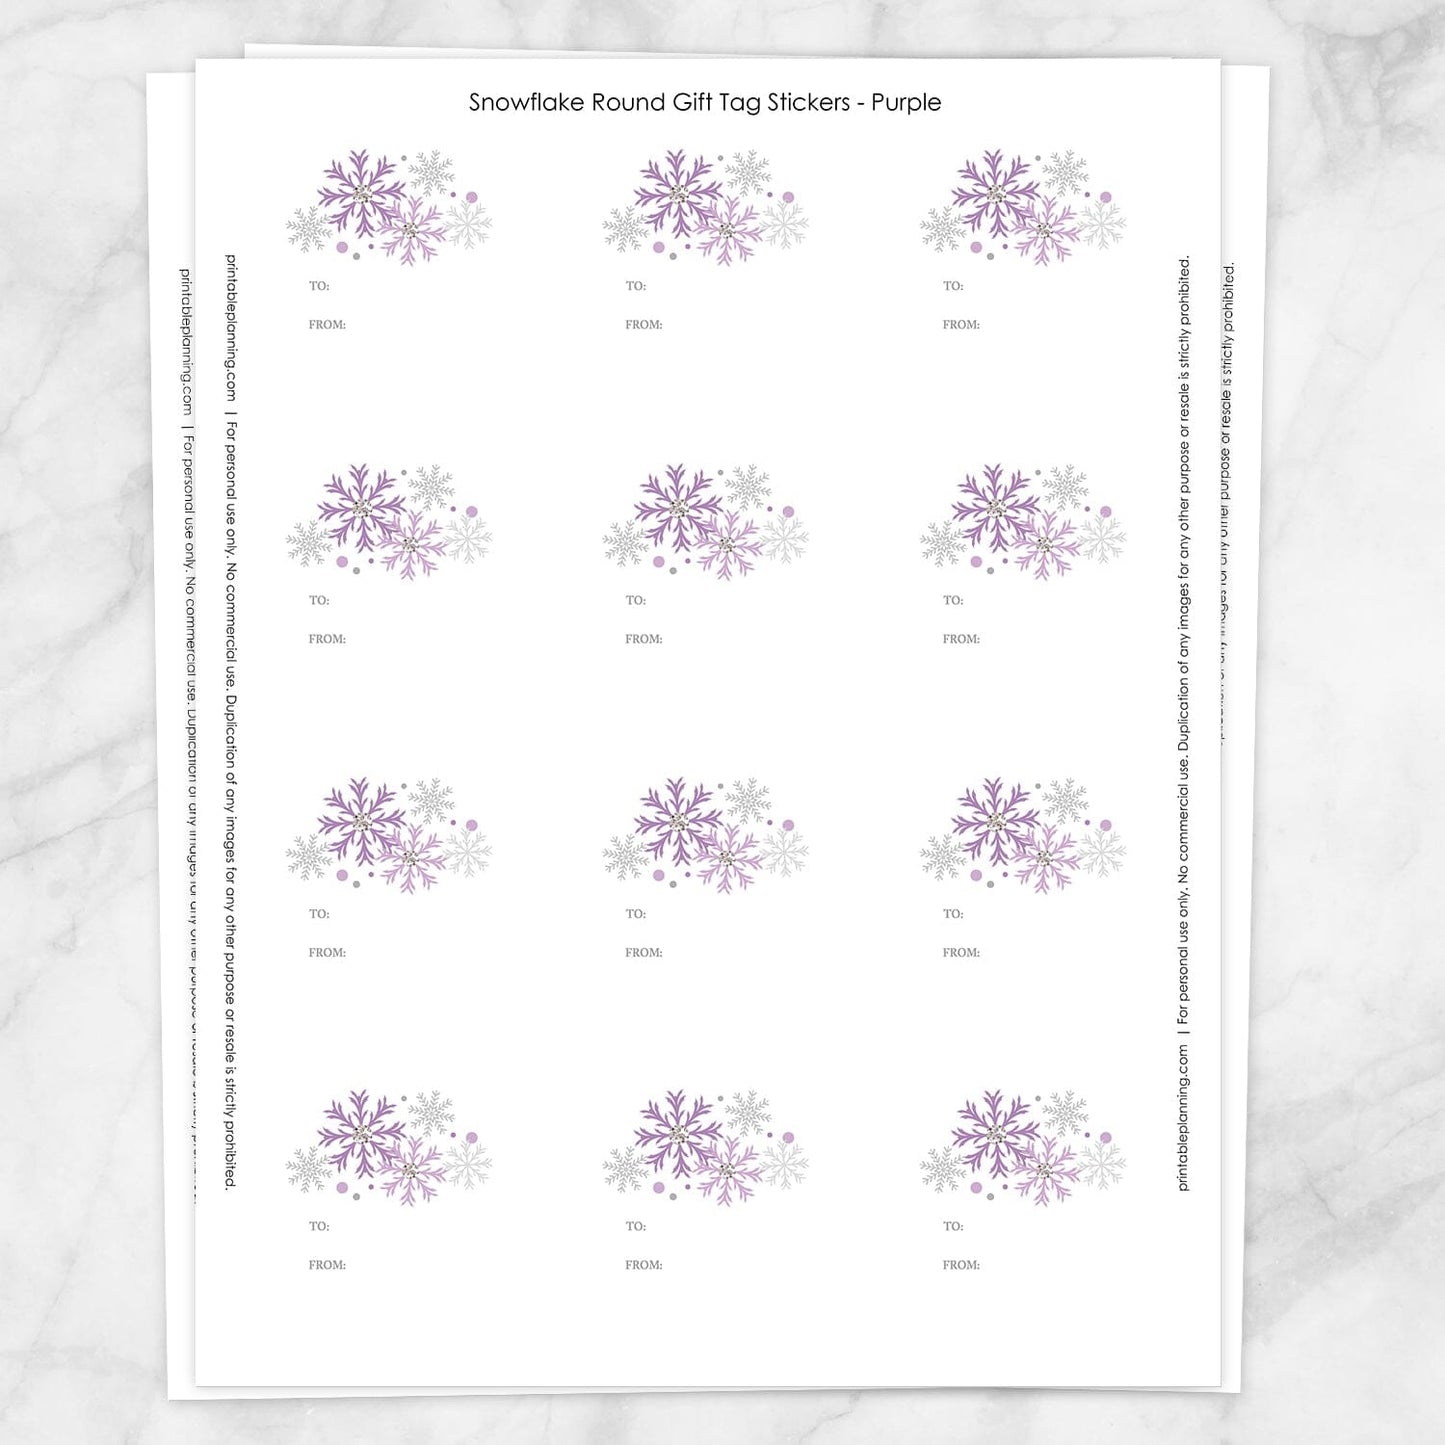 Printable Purple Snowflake Gift Tag Stickers at Printable Planning. Sheet of 12 stickers.